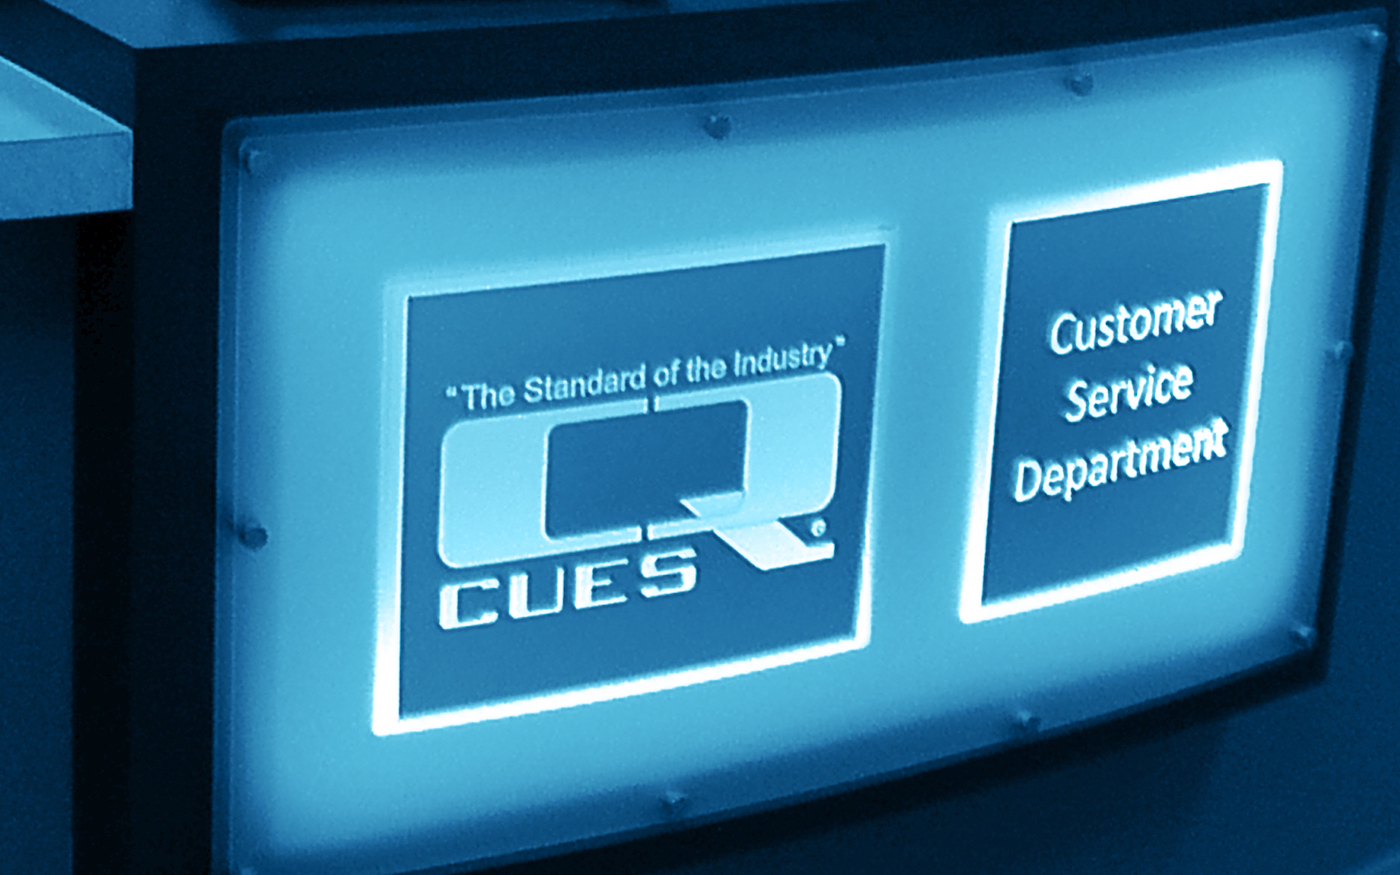 ​CUES provides industry customer service.